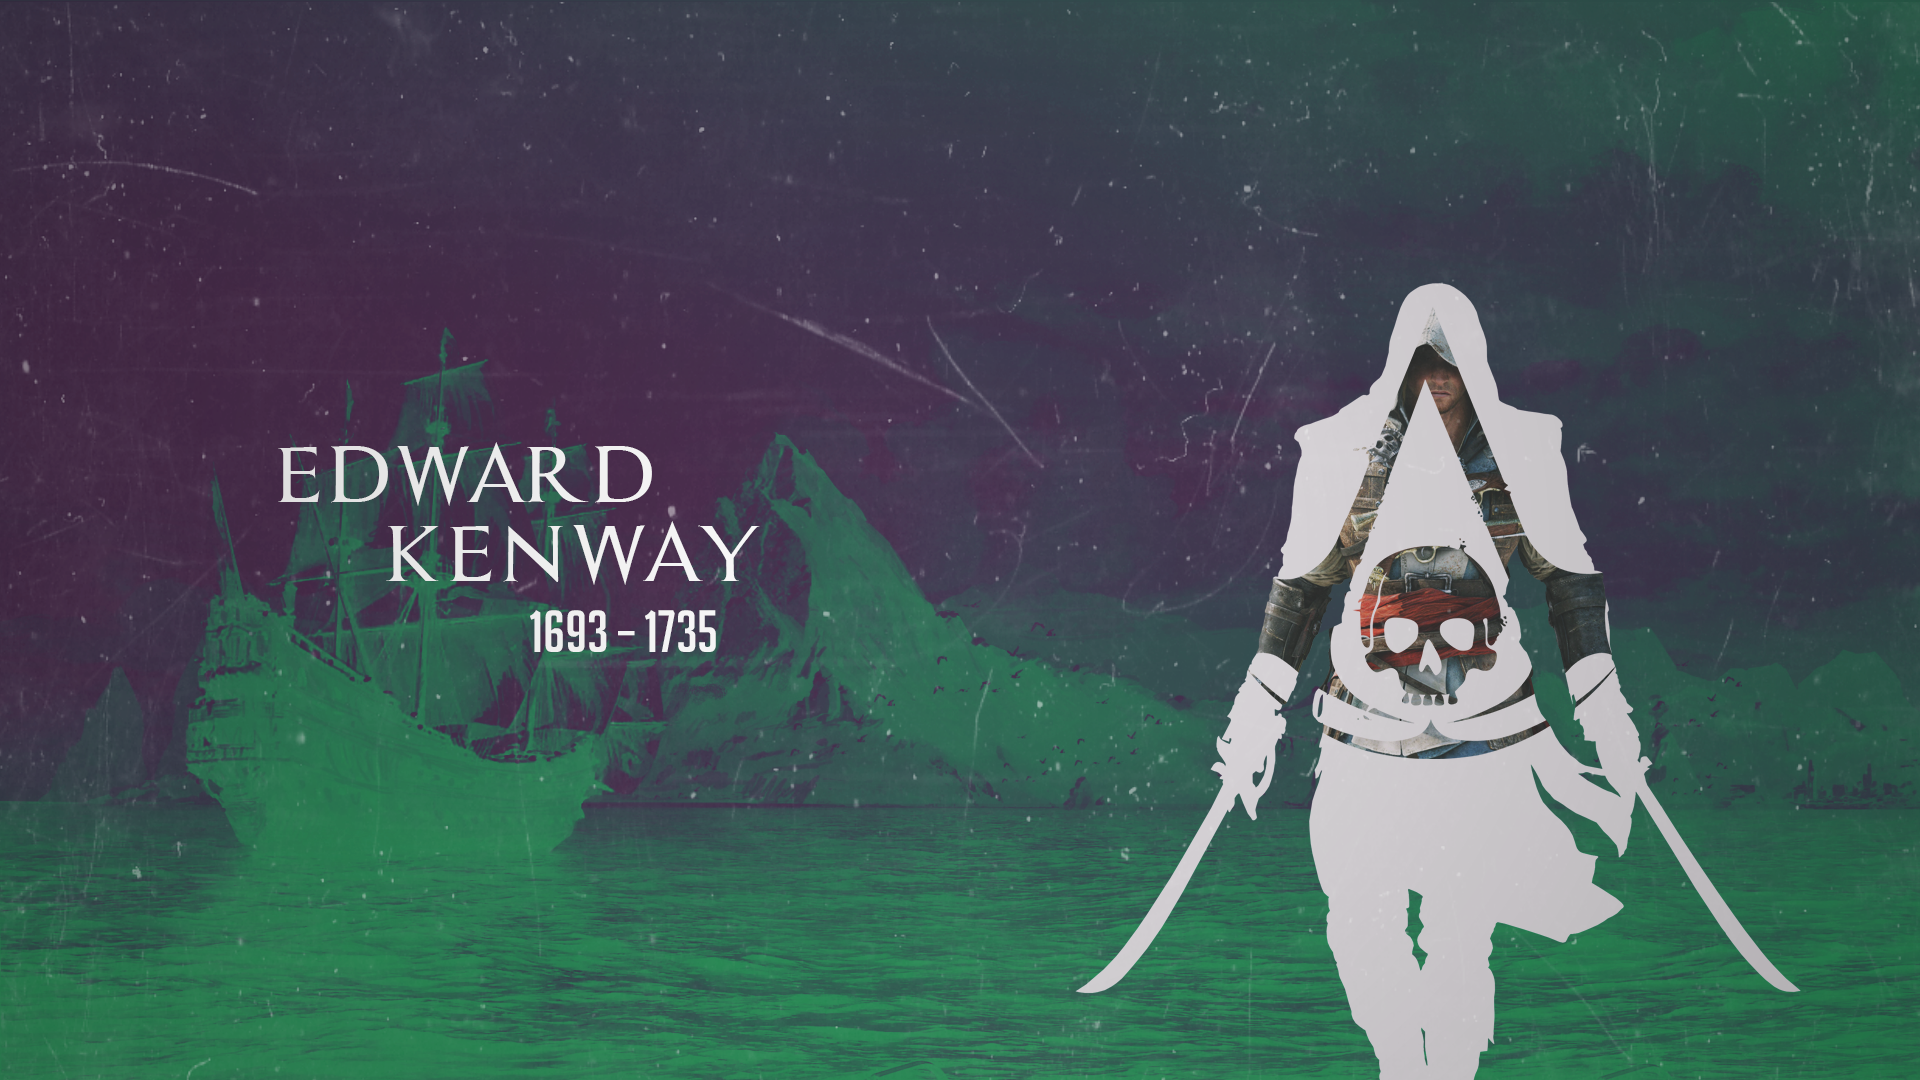 General 1920x1080 Assassin's Creed Edward Kenway abstract photo manipulation video games video game characters Ubisoft